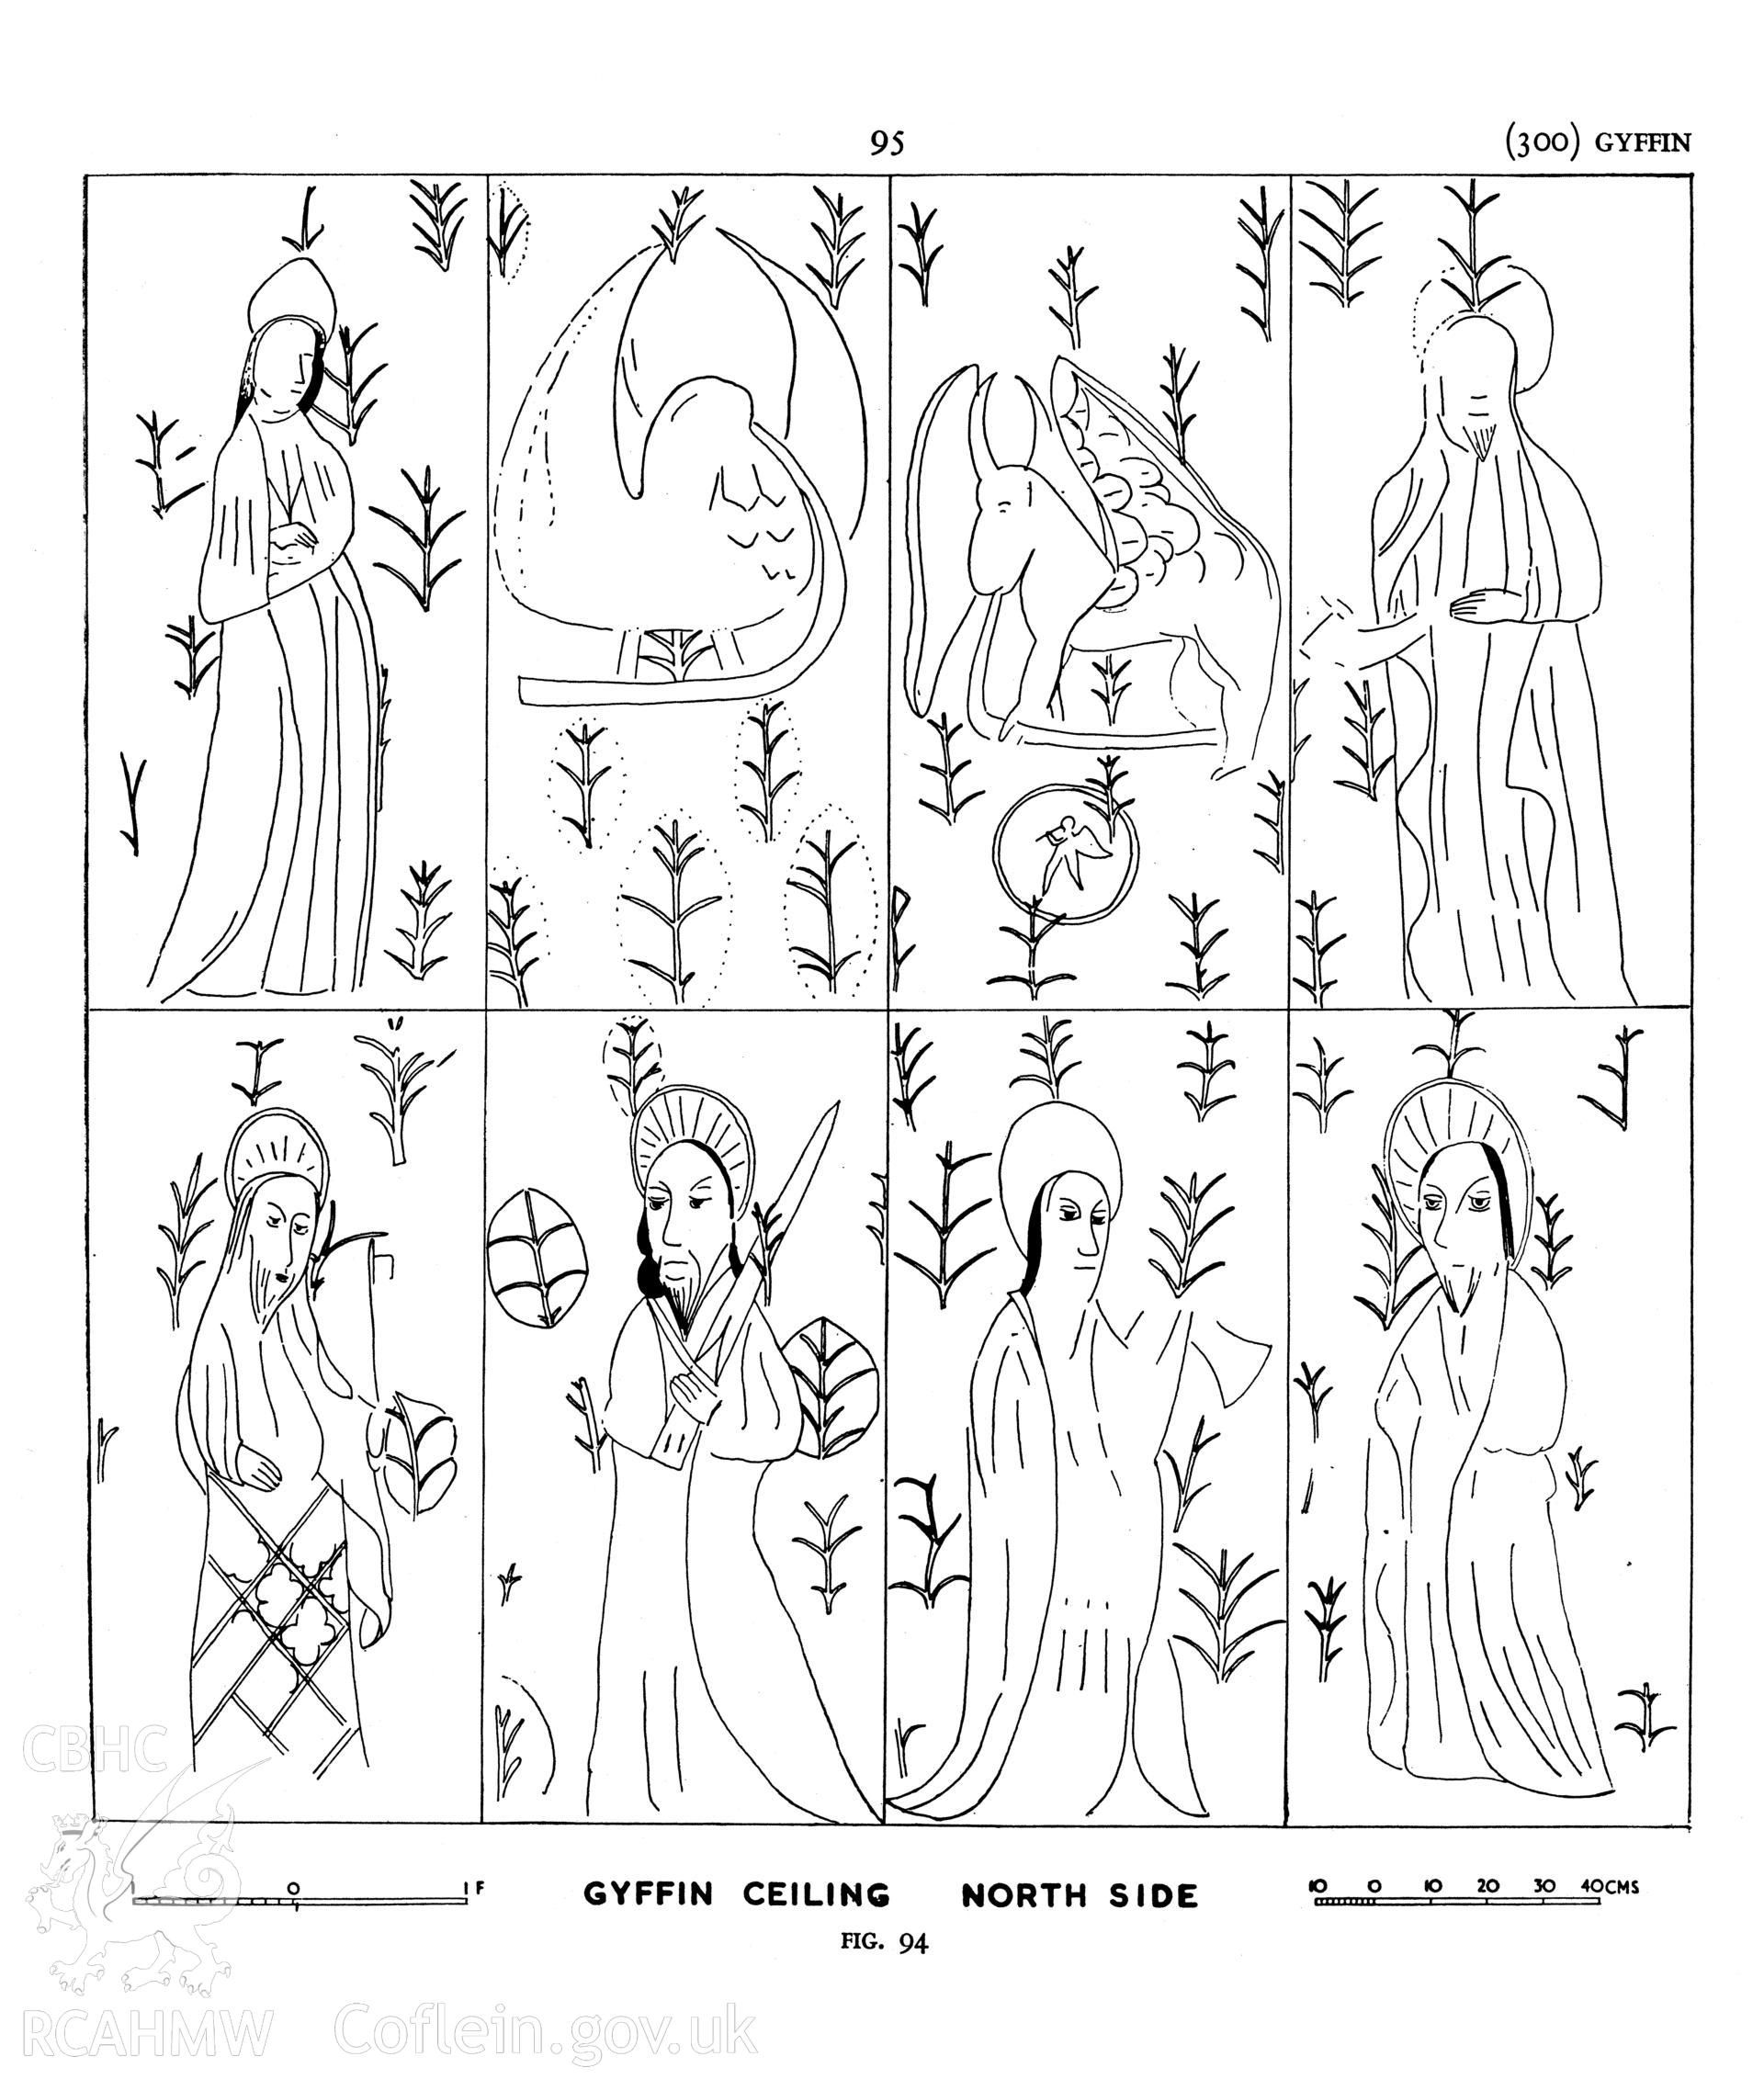 Record drawing of the painted figures on the canopy at Y Gyffin. Scan by Y Lolfa of RCAHMW, Caernarvonshire Inventory, Vol. I, figs 94 & 95. Original drawing not scanned. As published in 'Temlau Peintiedig: Murluniau a Chroglenni yn Eglwysi Cymru, 1200–1800 / Painted Temples: Wallpaintings and Rood-screens in Welsh Churches, 1200–1800.' Figure 3.31a, page 115.